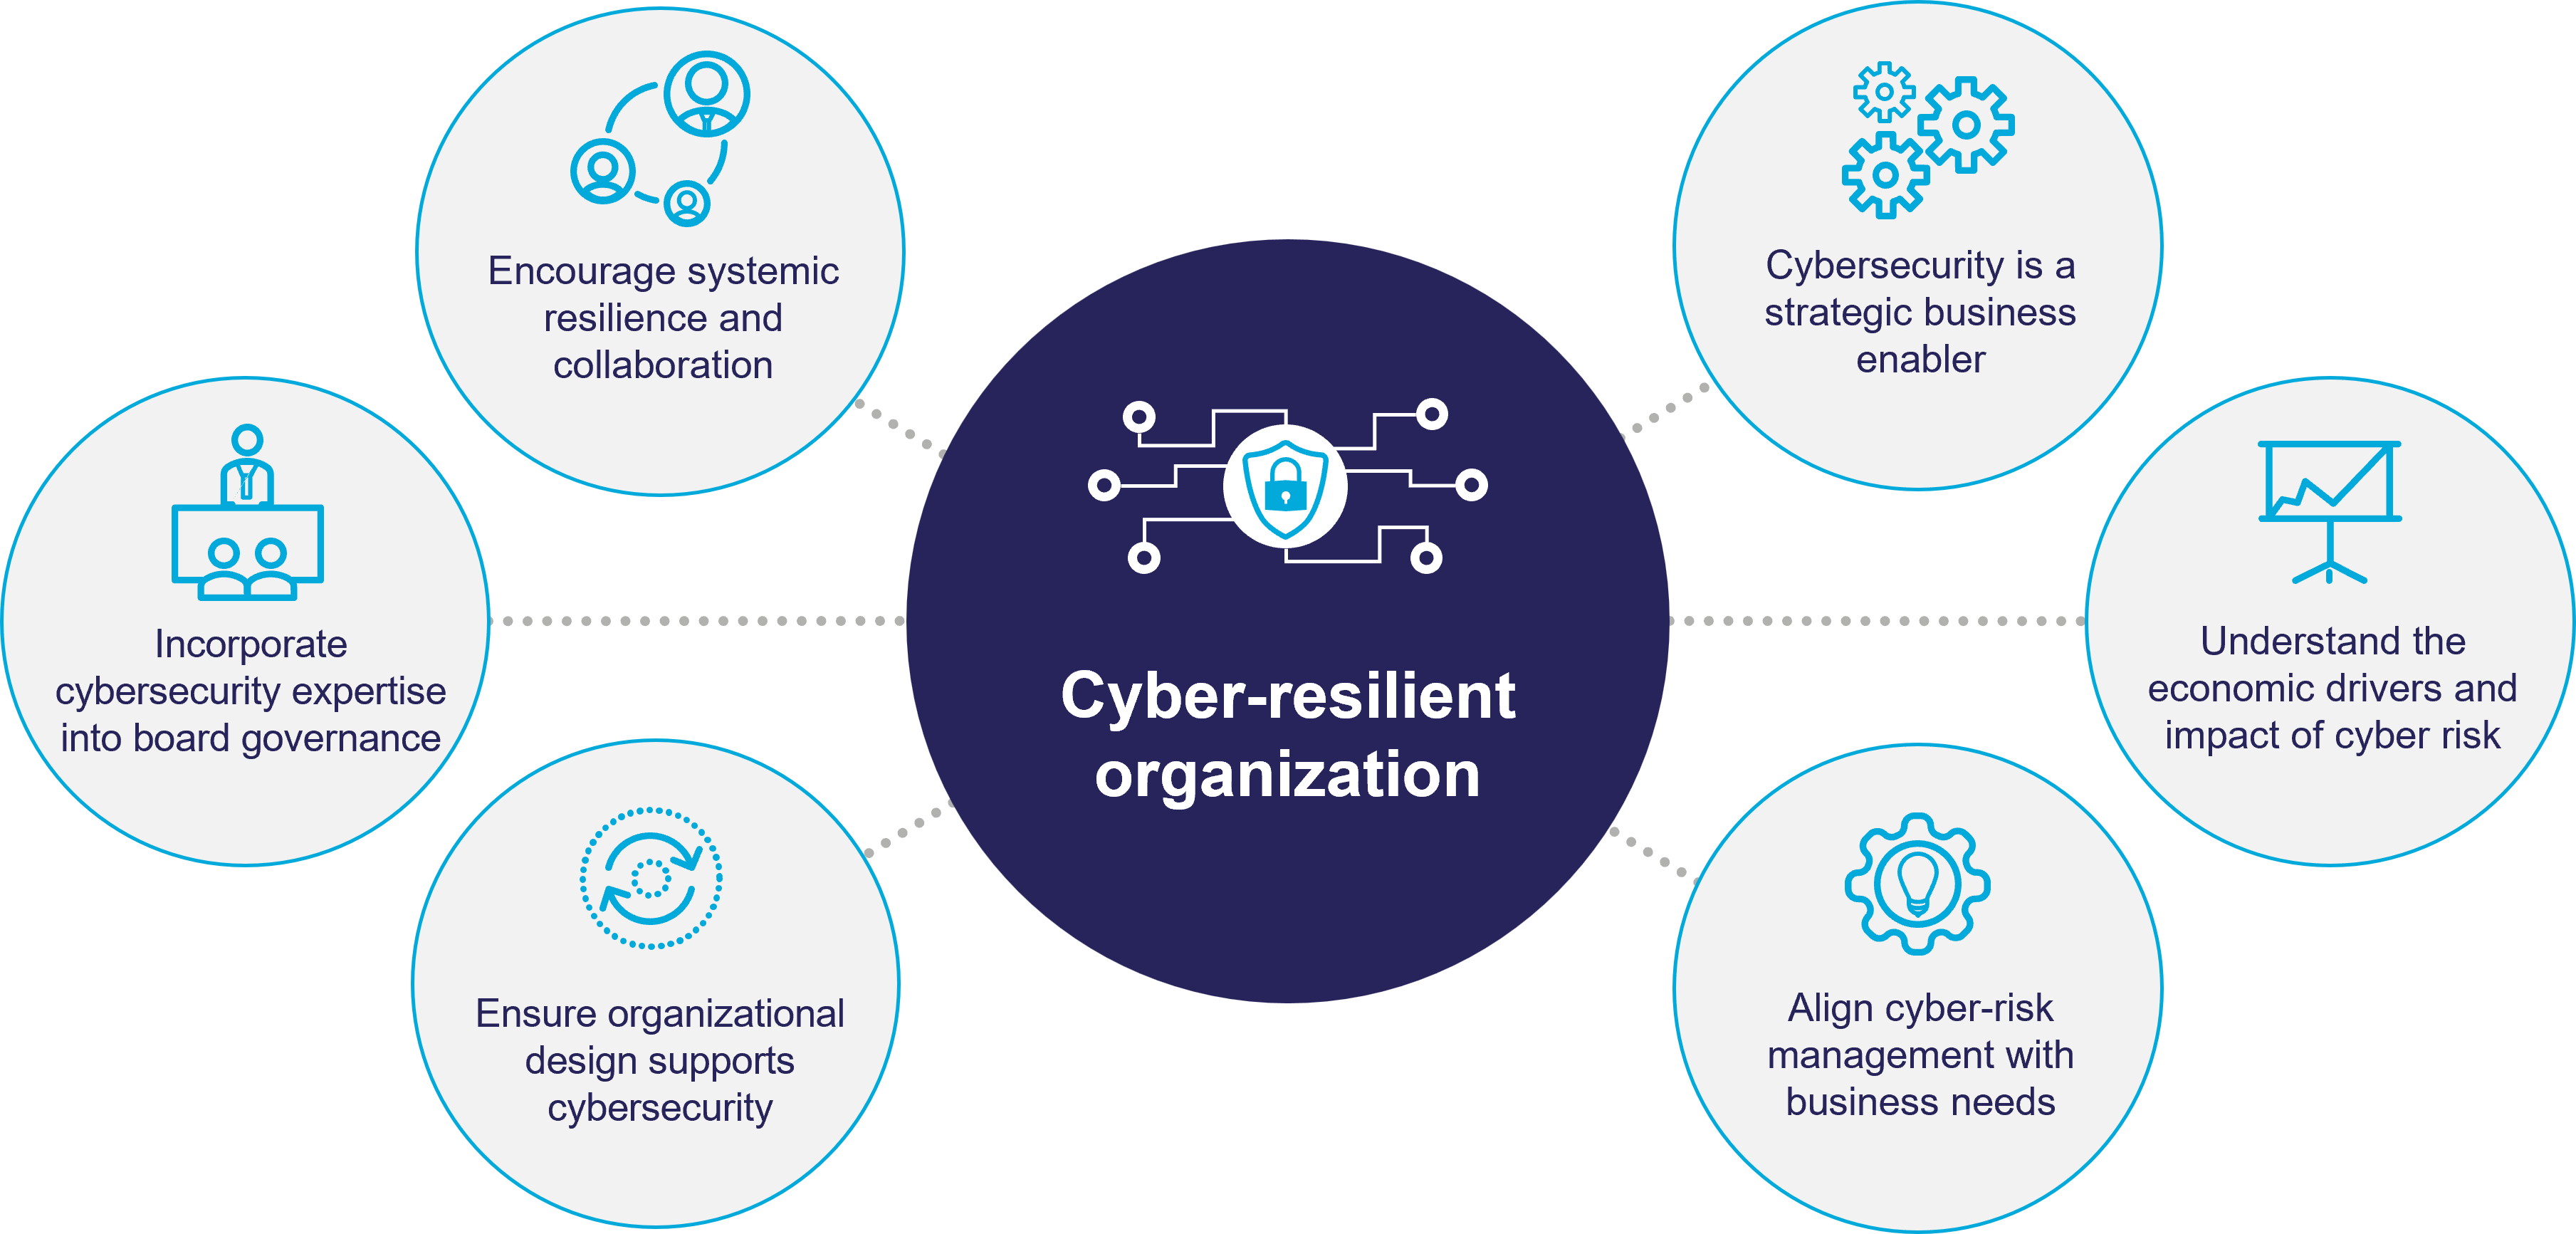 6 aspects of a cyber-resilient organization